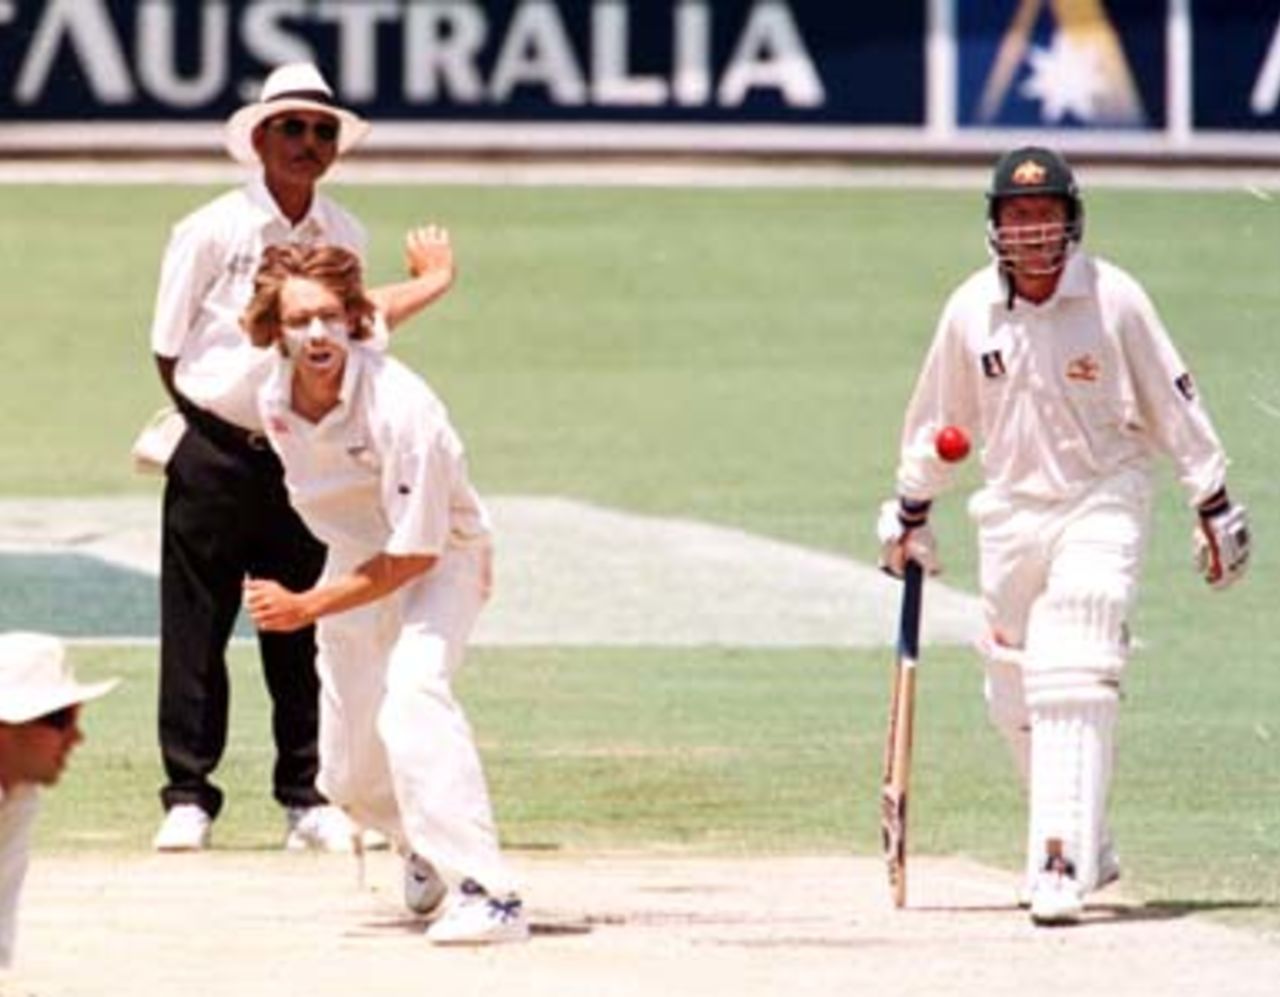 Daniel Vettori bowls during the 4th day of the 1st Test between Australia and New Zealand at the Gabba, 7 - 11 Nov 1997